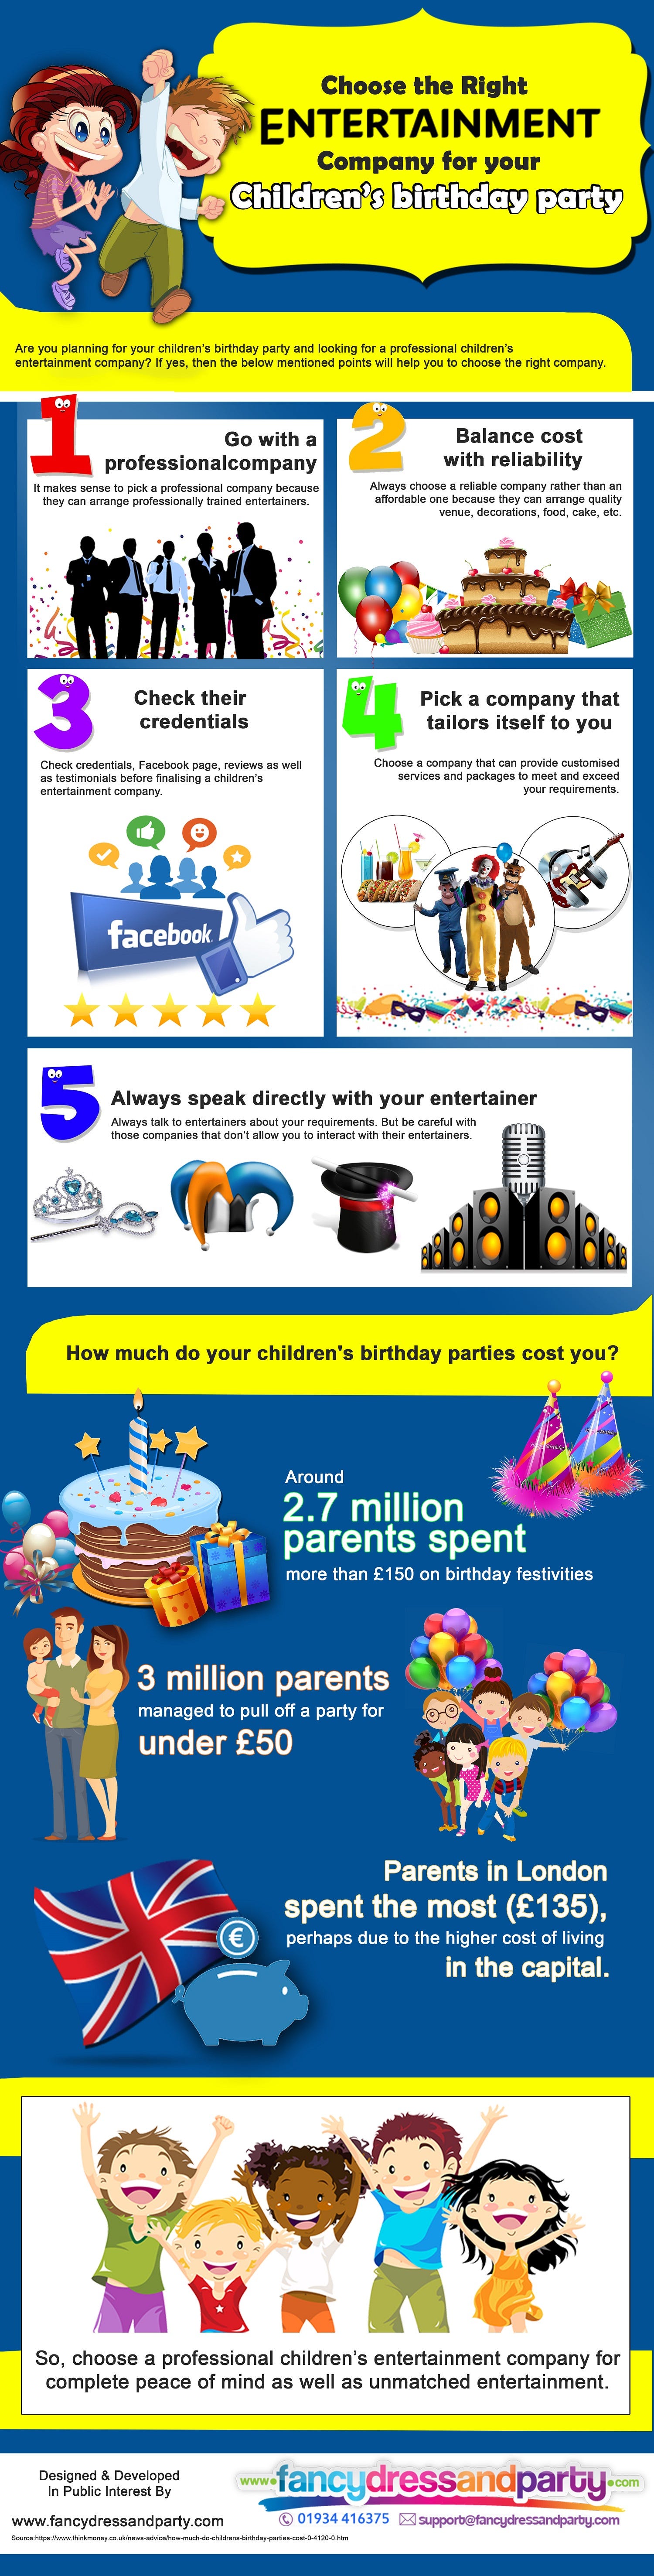 Choose The Right Entertainment Company For Your Children S Birthday - choose the right entertainment company for your children s birthda!   y party